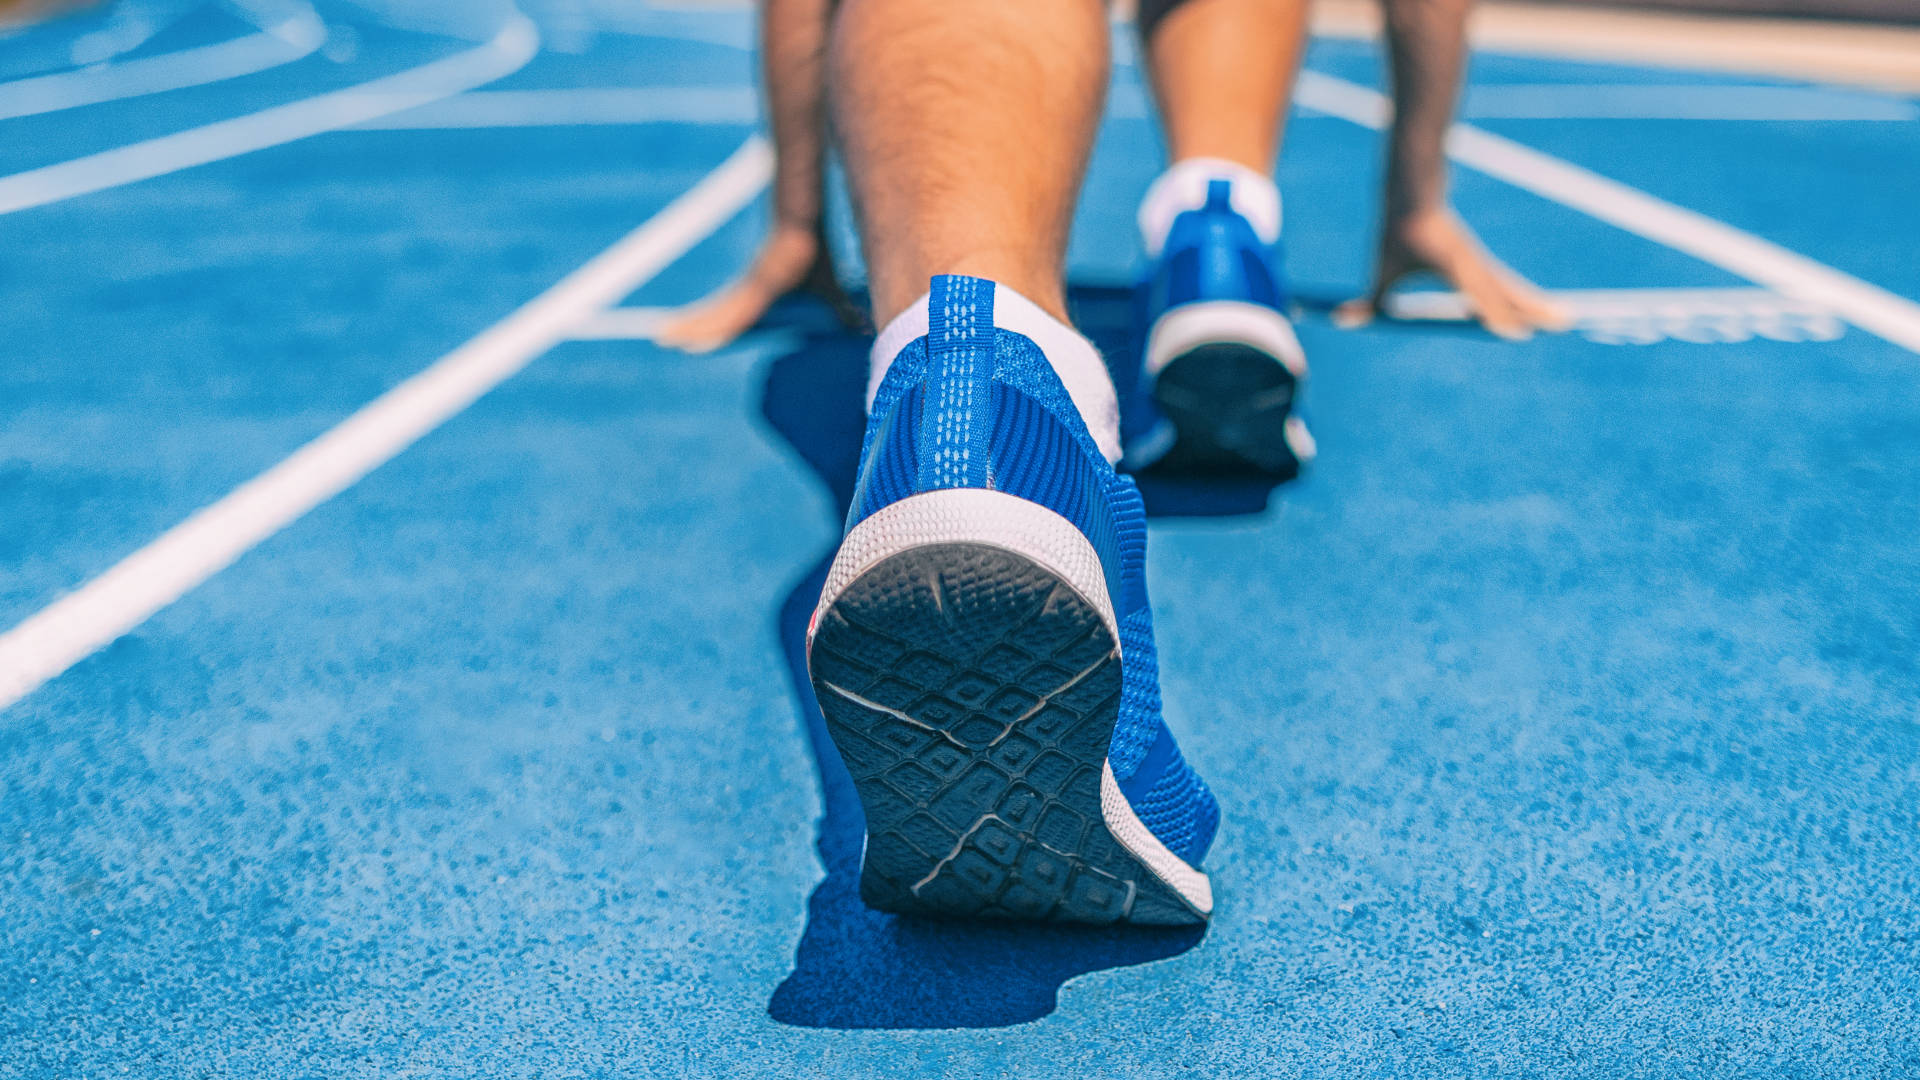 A view of a runner at the starting line of a race on a track. The perspective is from about a meter behind their shoes and only encompasses their trainers